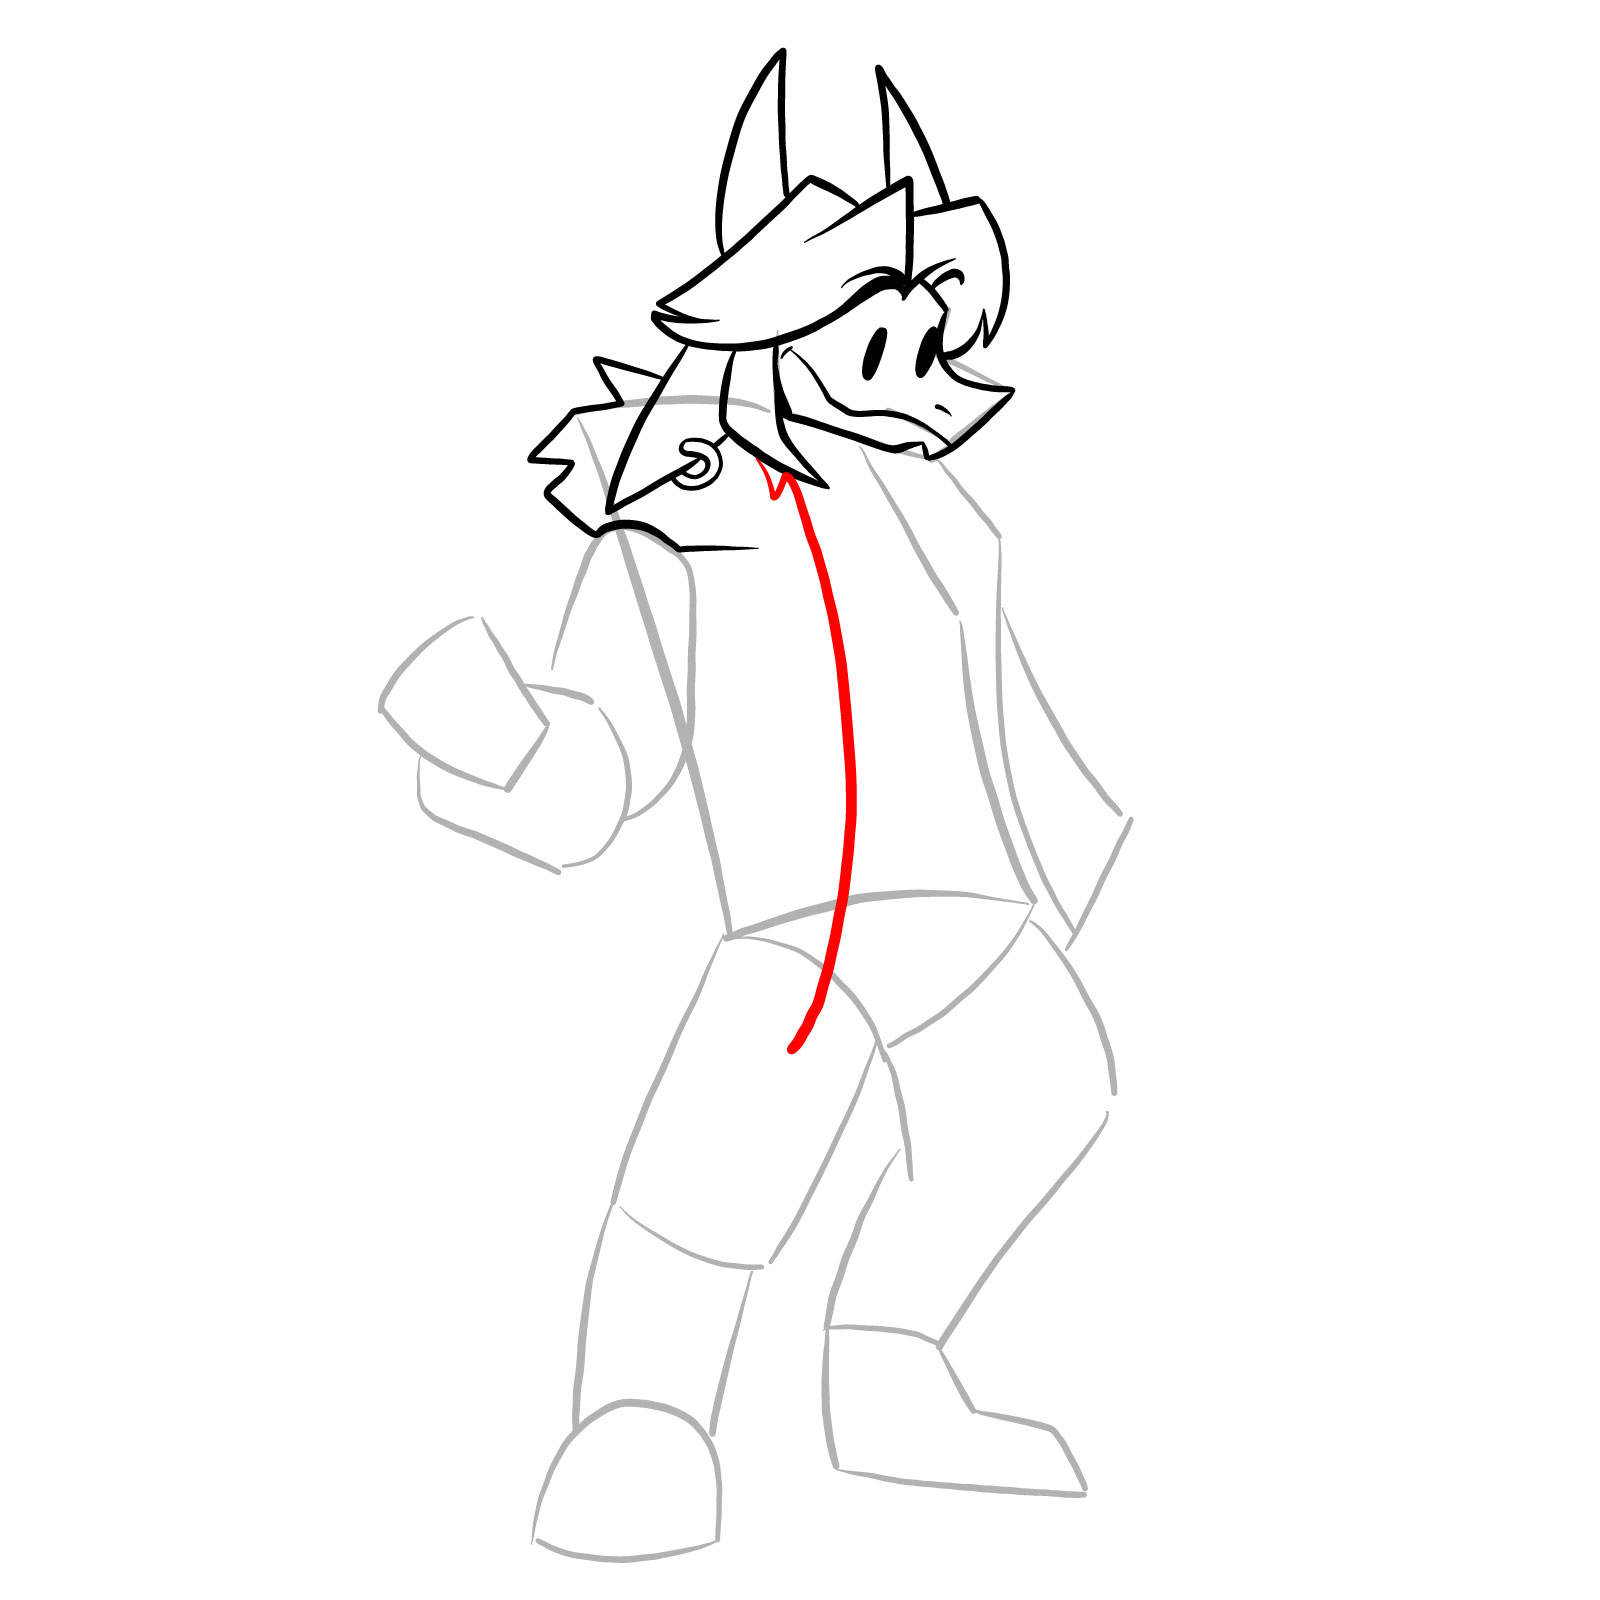 How to draw Ace from FNF - step 15